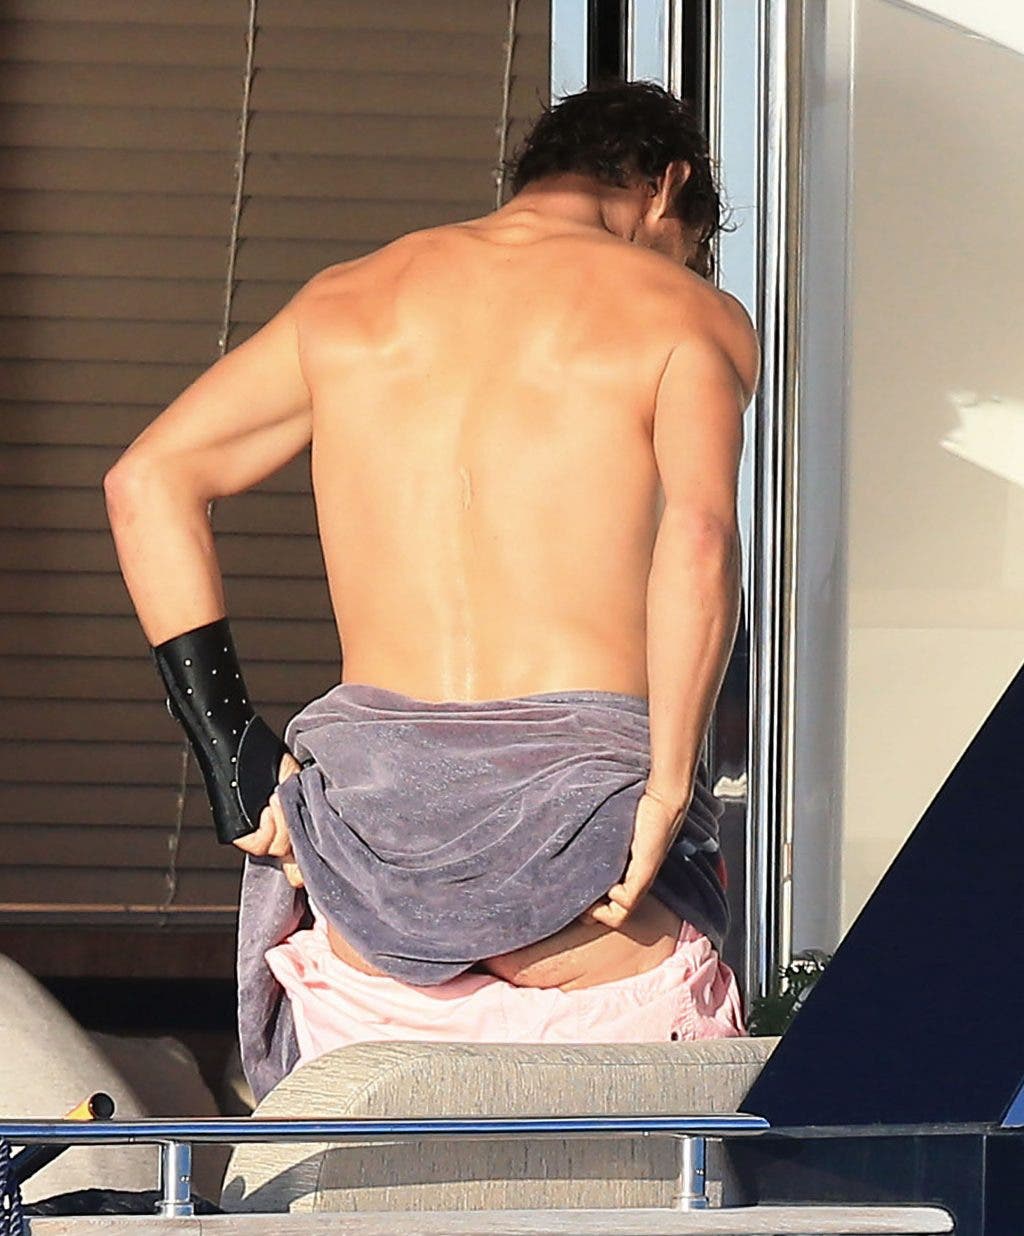 Exclusive... 52107234 Tennis star Rafael Nadal is spotted showing off his butt while changing on a yacht during his vacation in Ibiza, Spain on June 23, 2016. FameFlynet, Inc - Beverly Hills, CA, USA - +1 (310) 505-9876 RESTRICTIONS APPLY: USA/AUSTRALIA ONLY